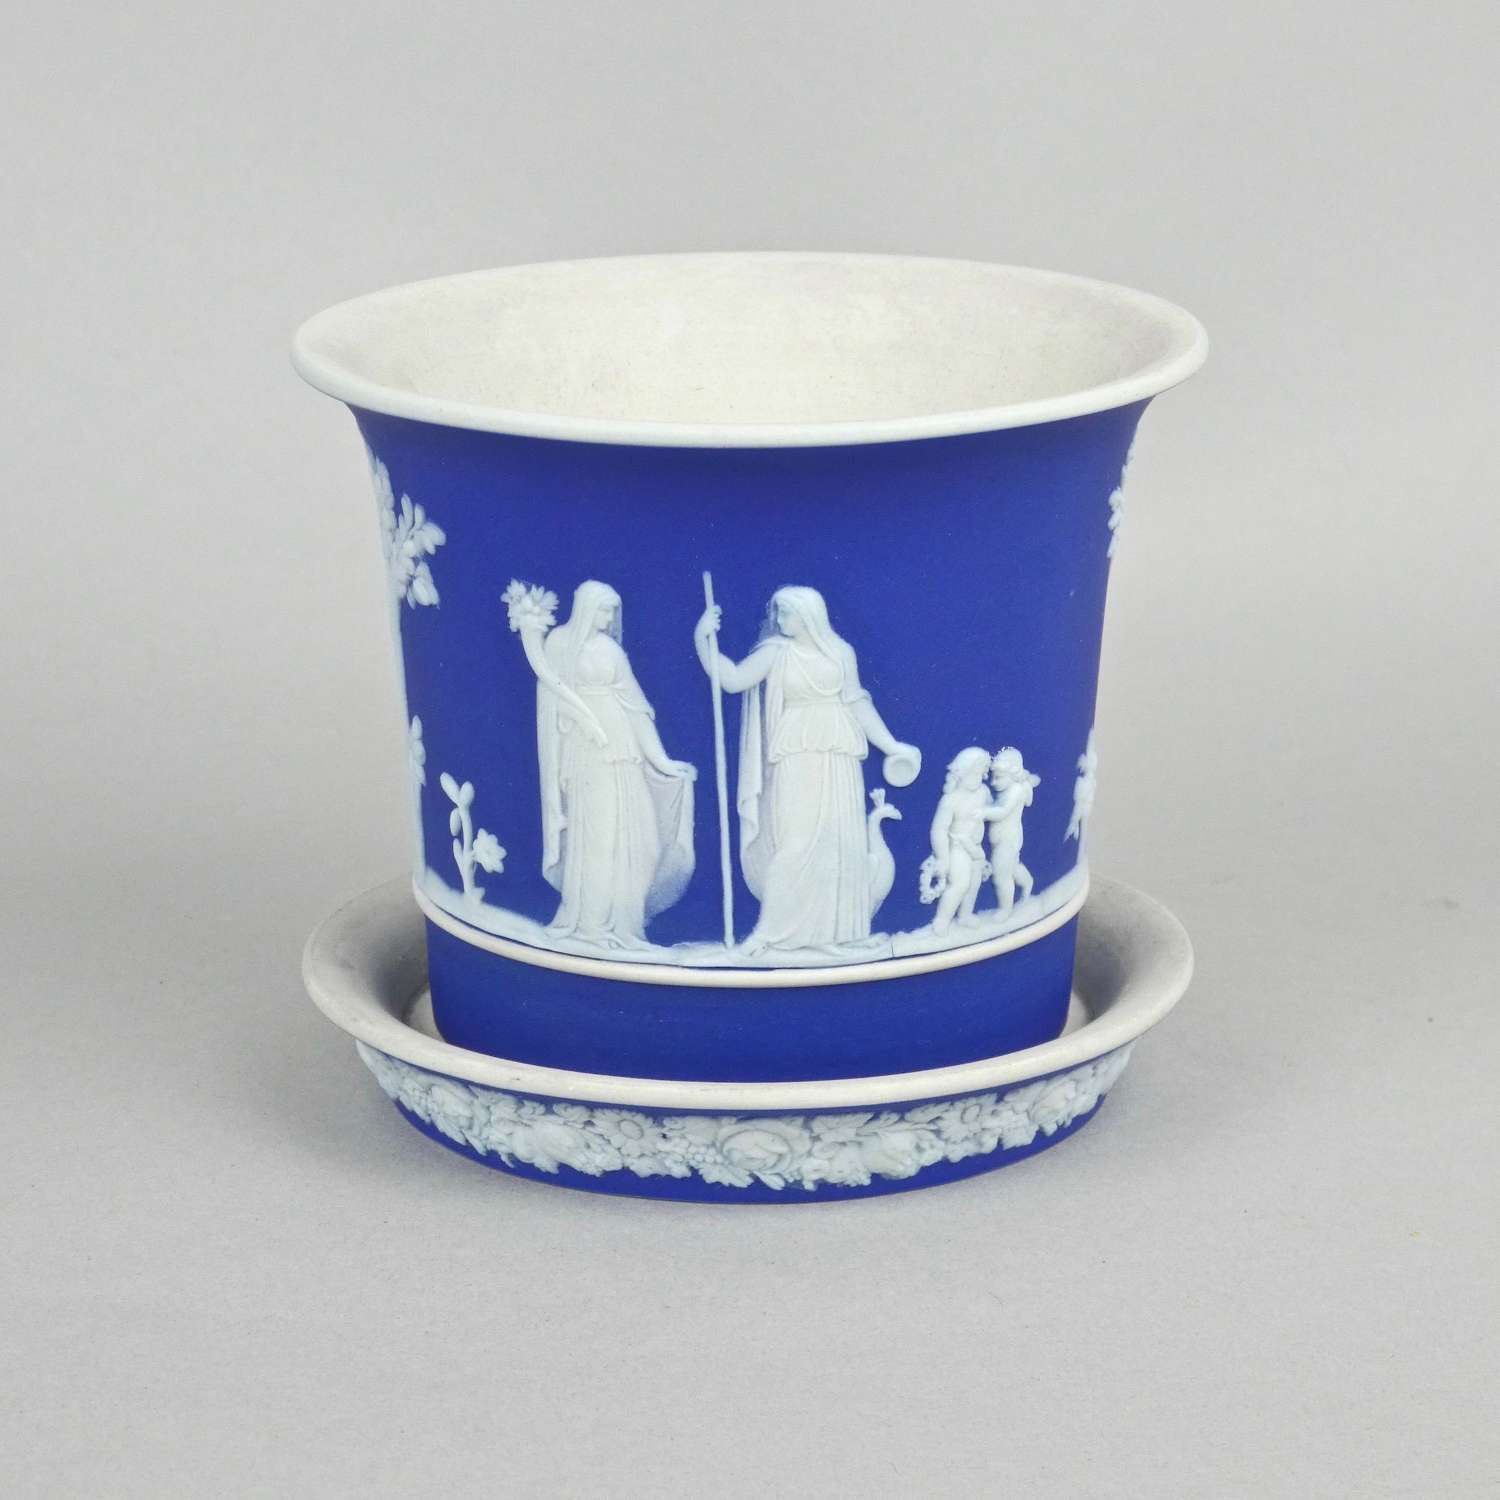 Small, Wedgwood cache pot and stand